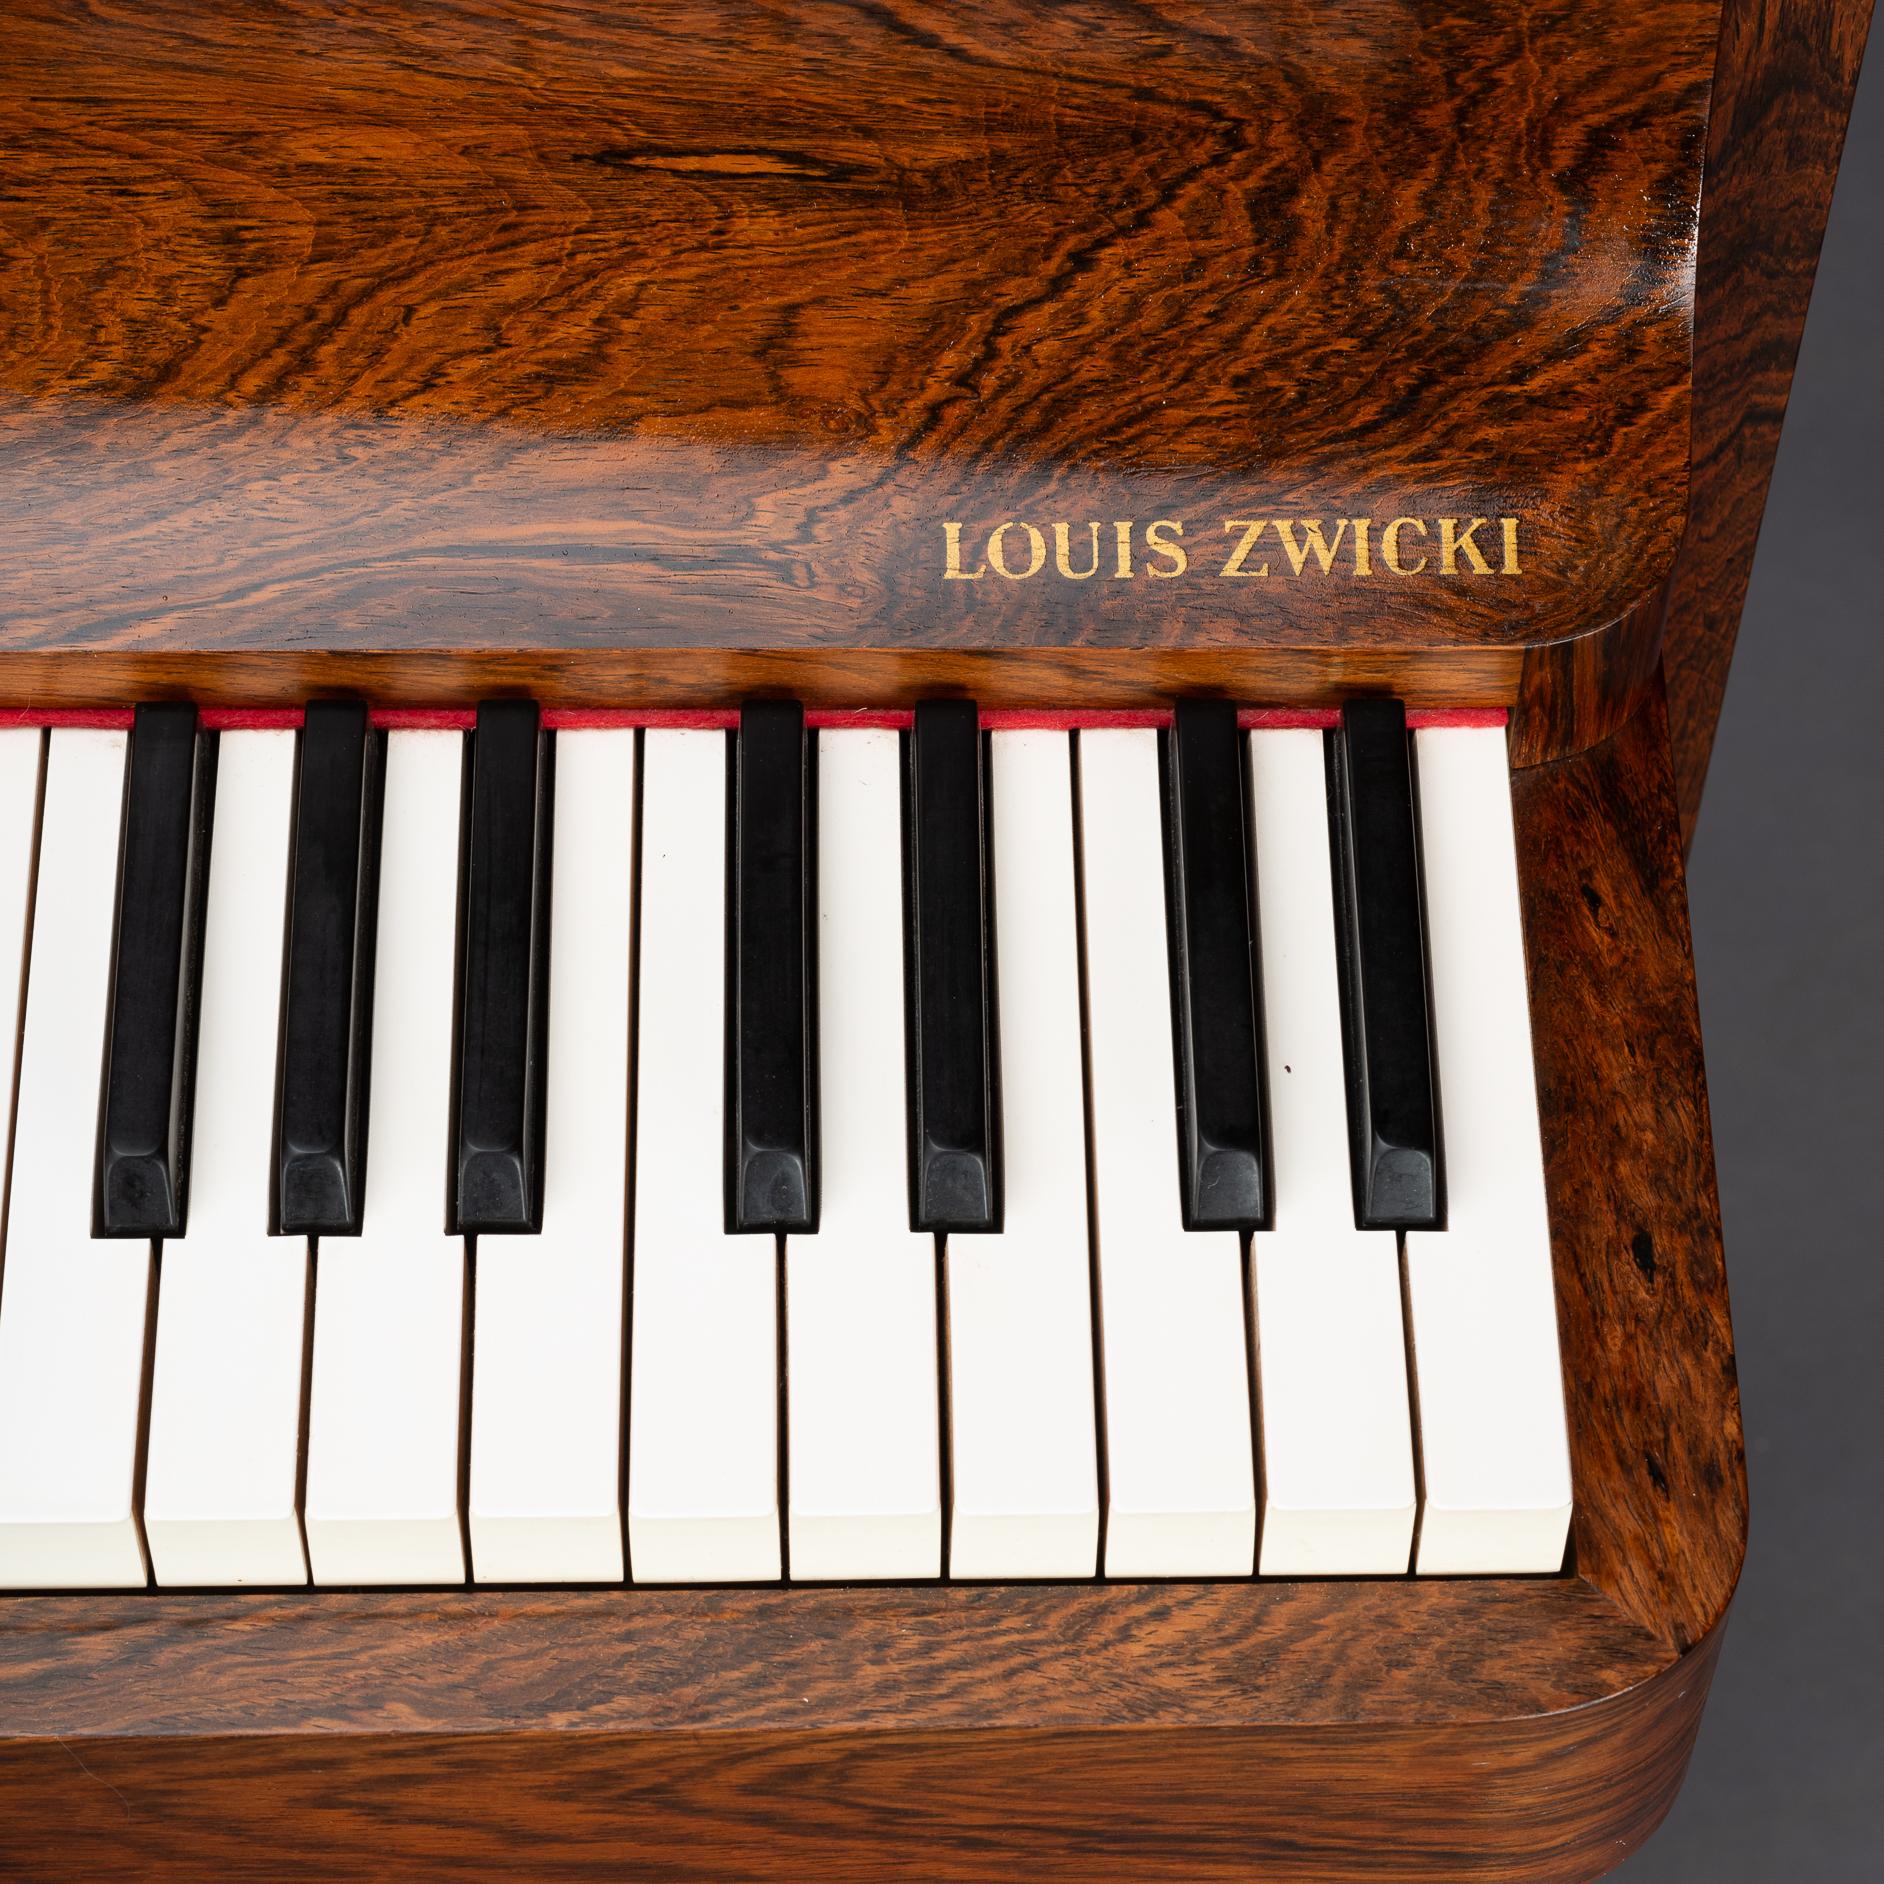 Danish Design Midcentury Rosewood Pianette by Louis Zwicki, 1950s For Sale 11